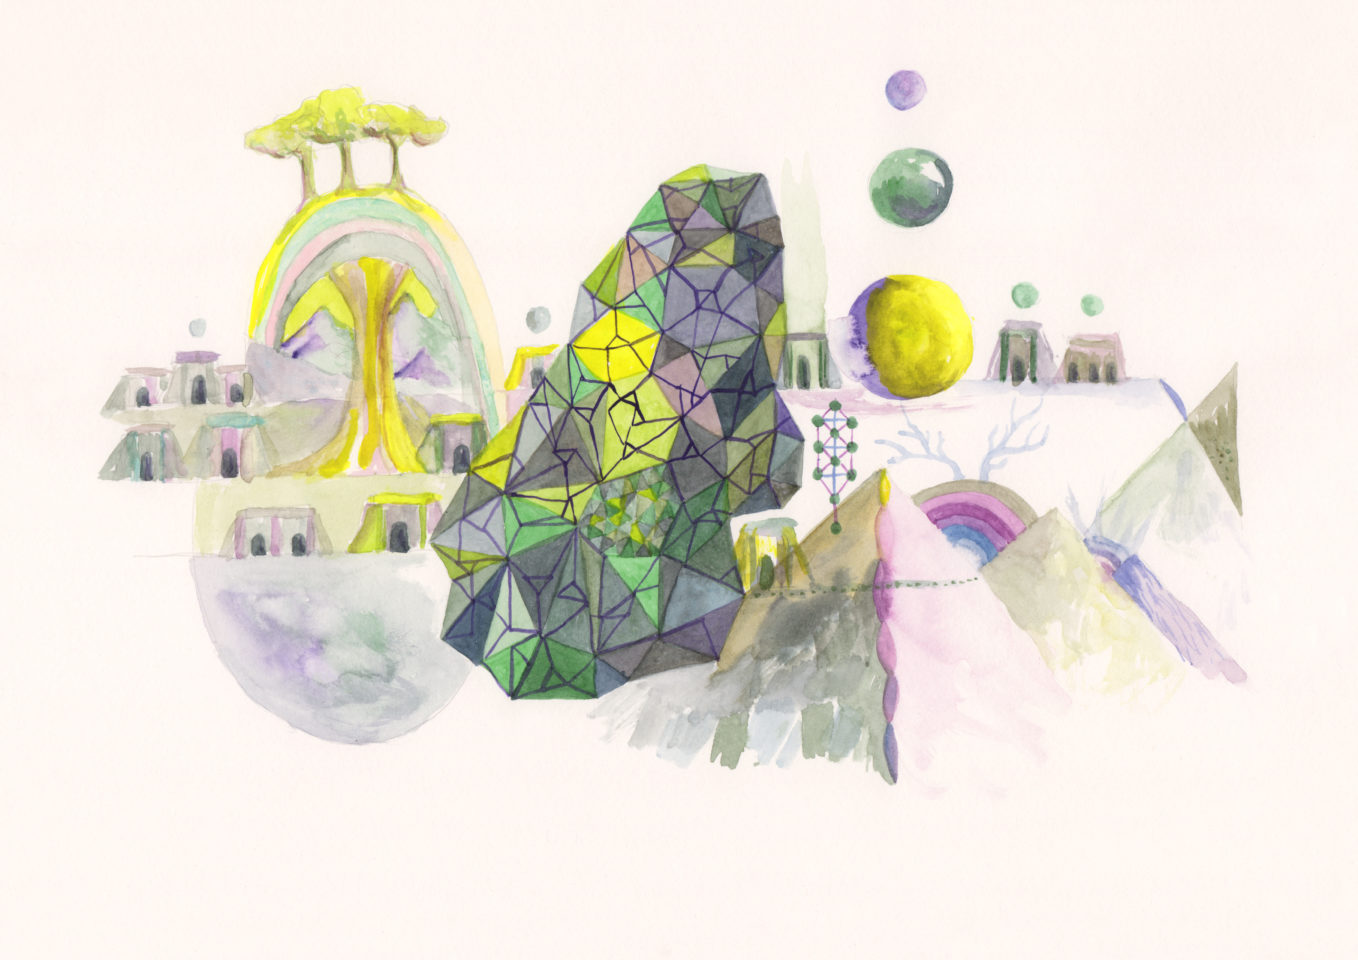 An illustration of green and yellow shapes with stones, buildings, mountains and trees.